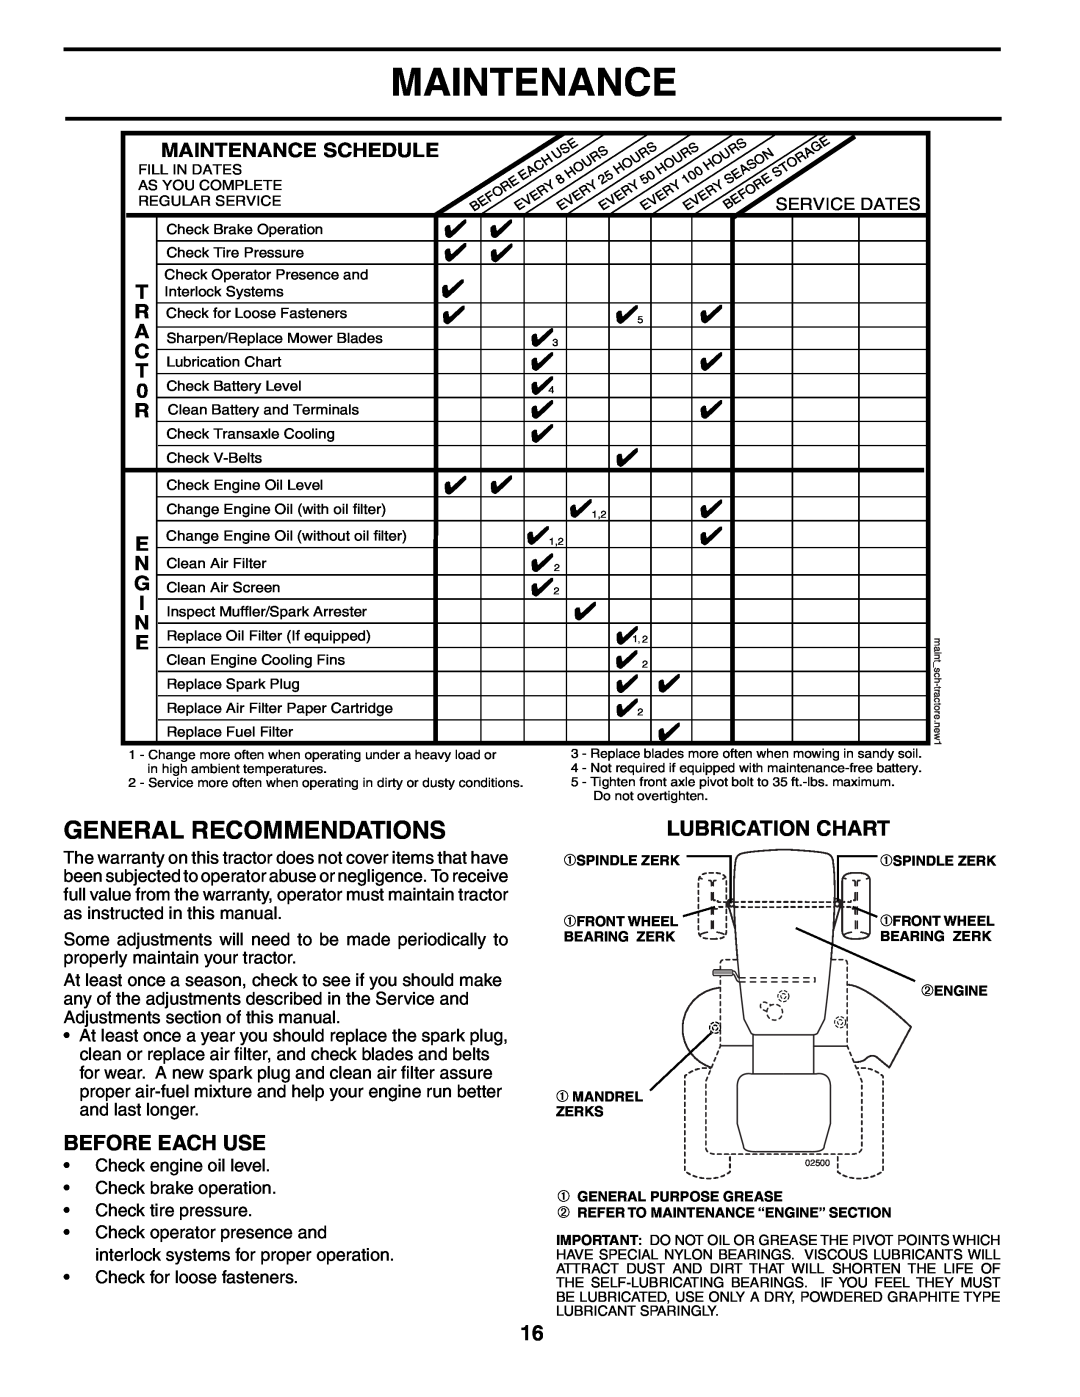 Poulan PD25PH48STD owner manual General Recommendations, Lubrication Chart, Before Each Use, Maintenance Schedule 